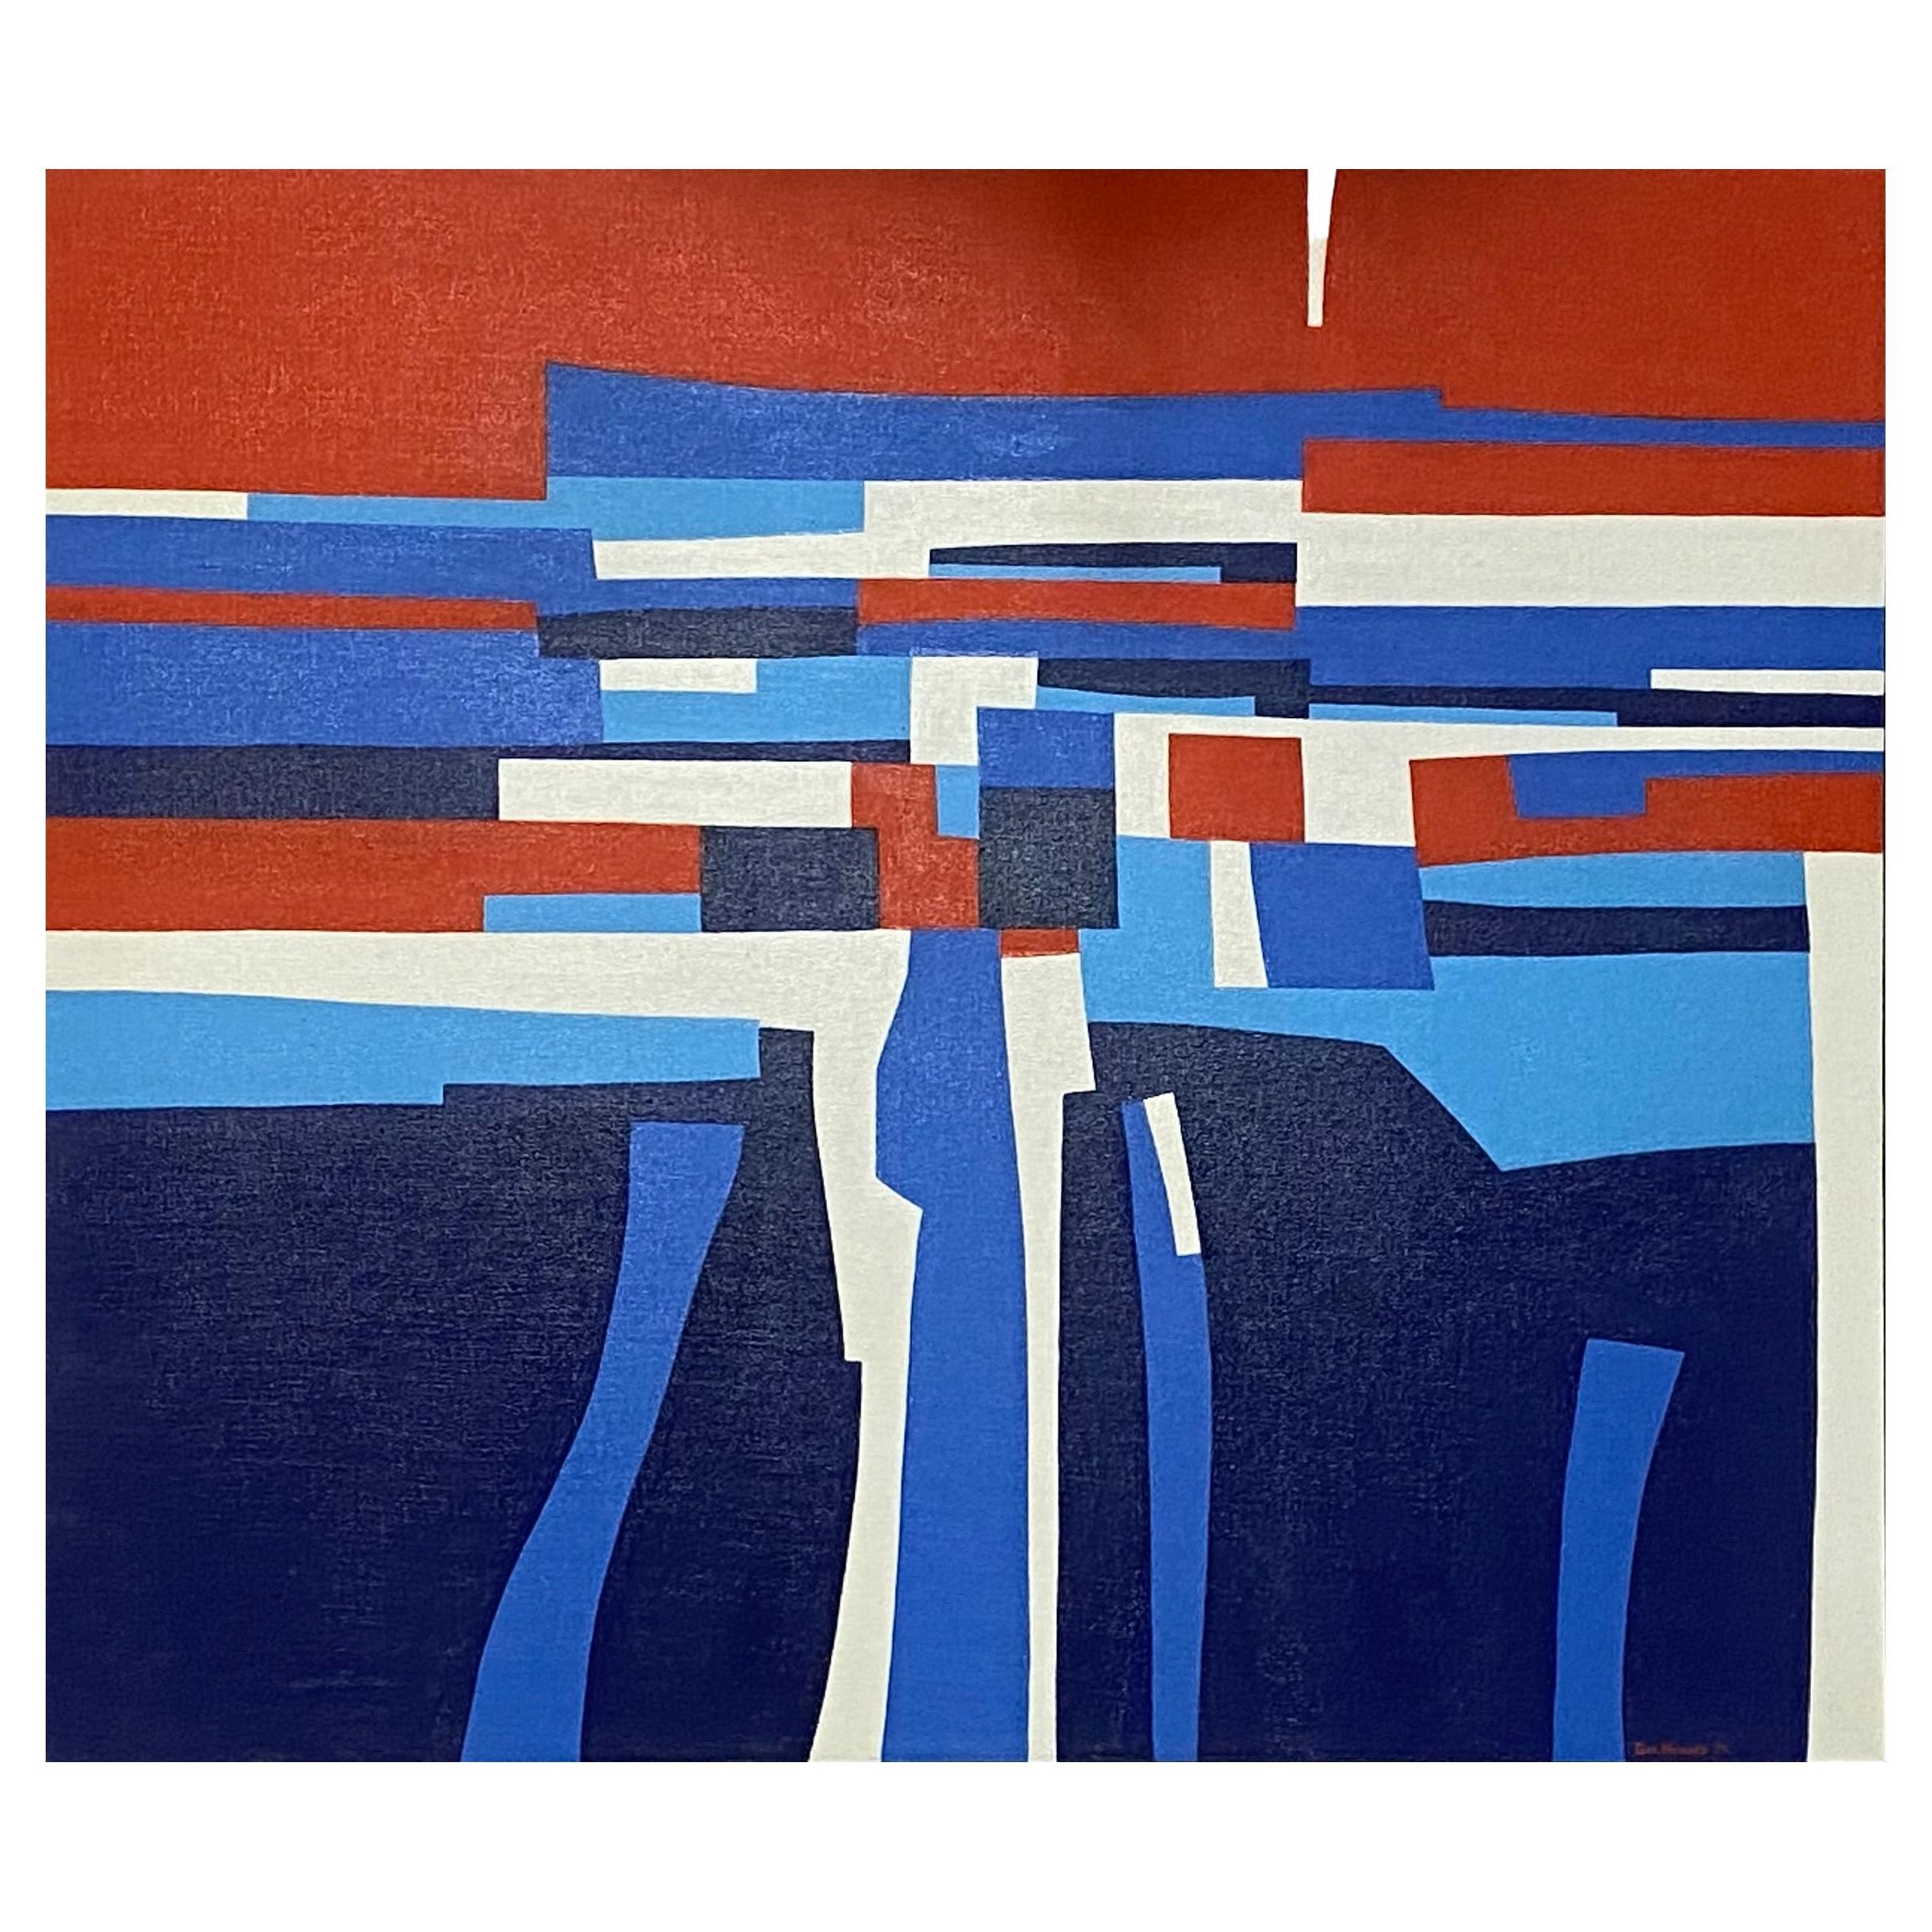 Mid-Century Modern Abstract Painting 1970 by George Howard